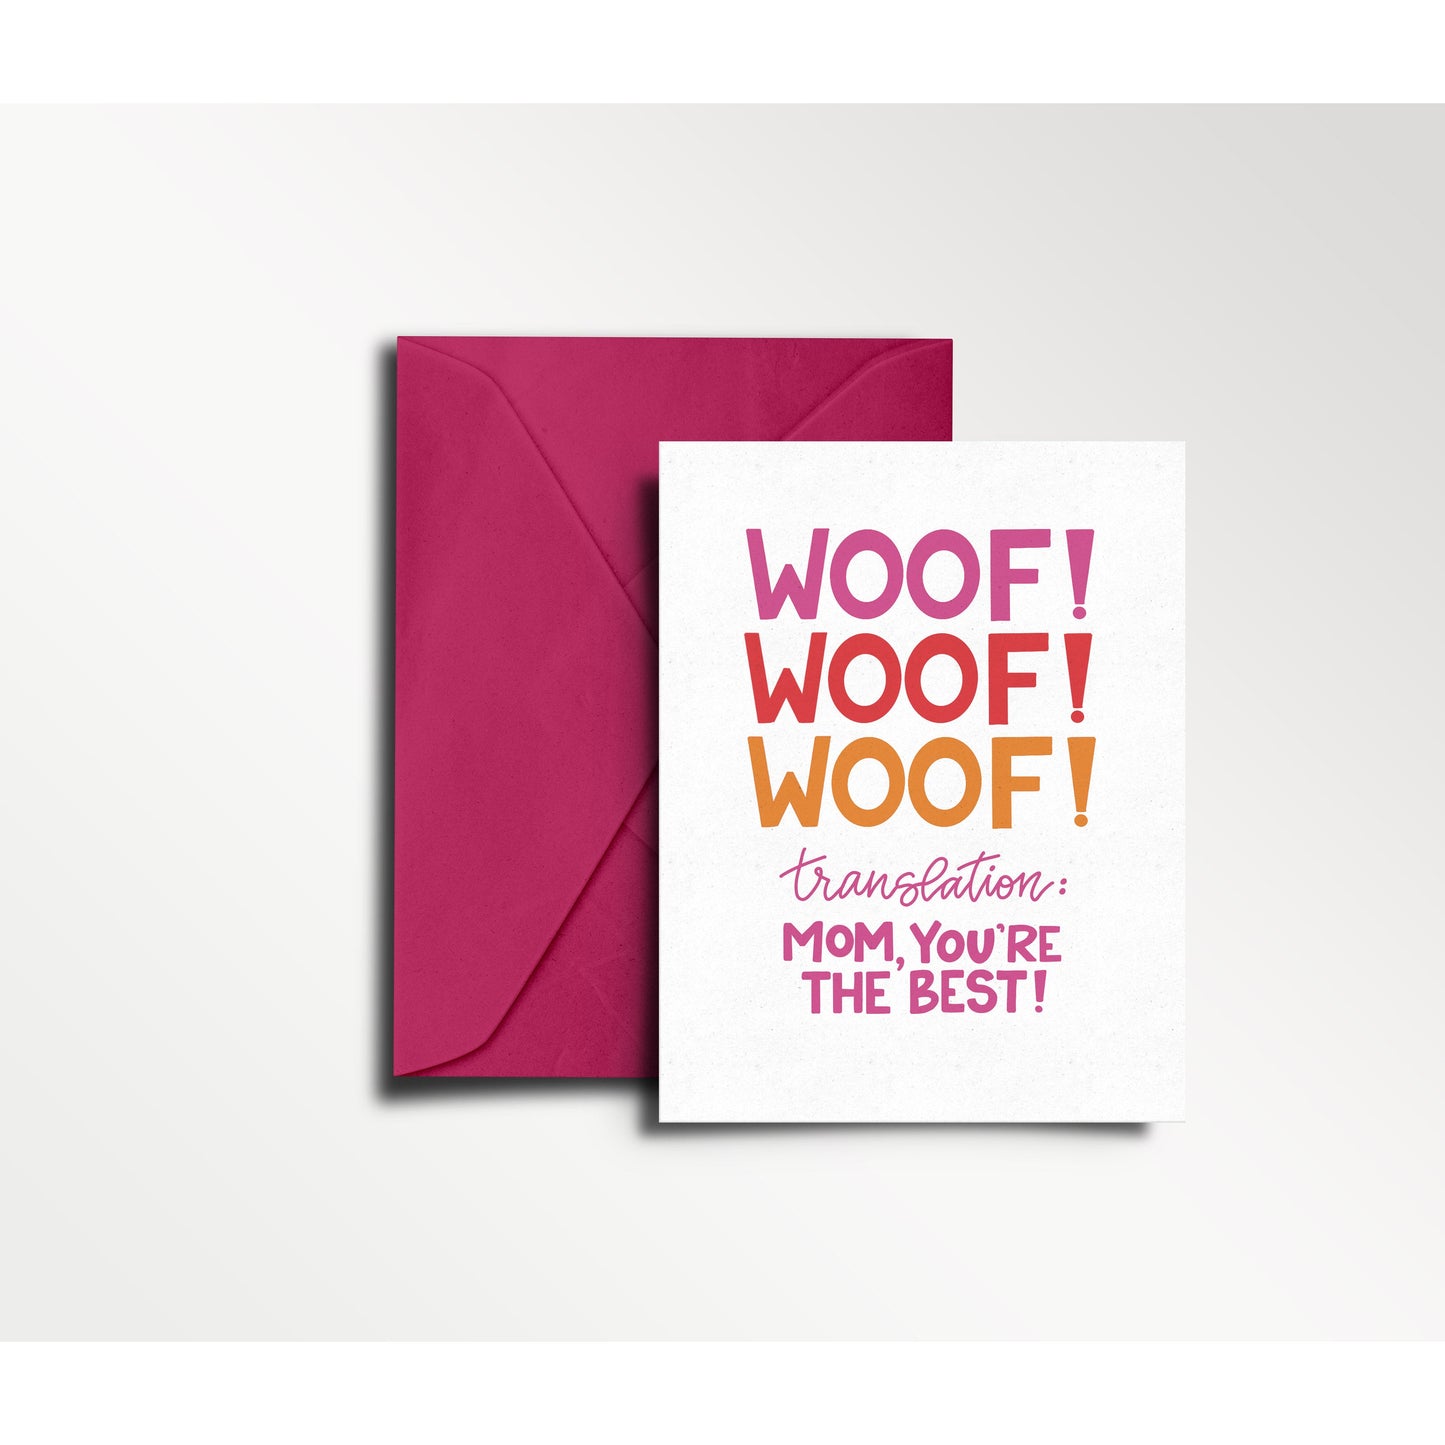 WOOF WOOF WOOF-Mom, You’re the Best Greeting Card